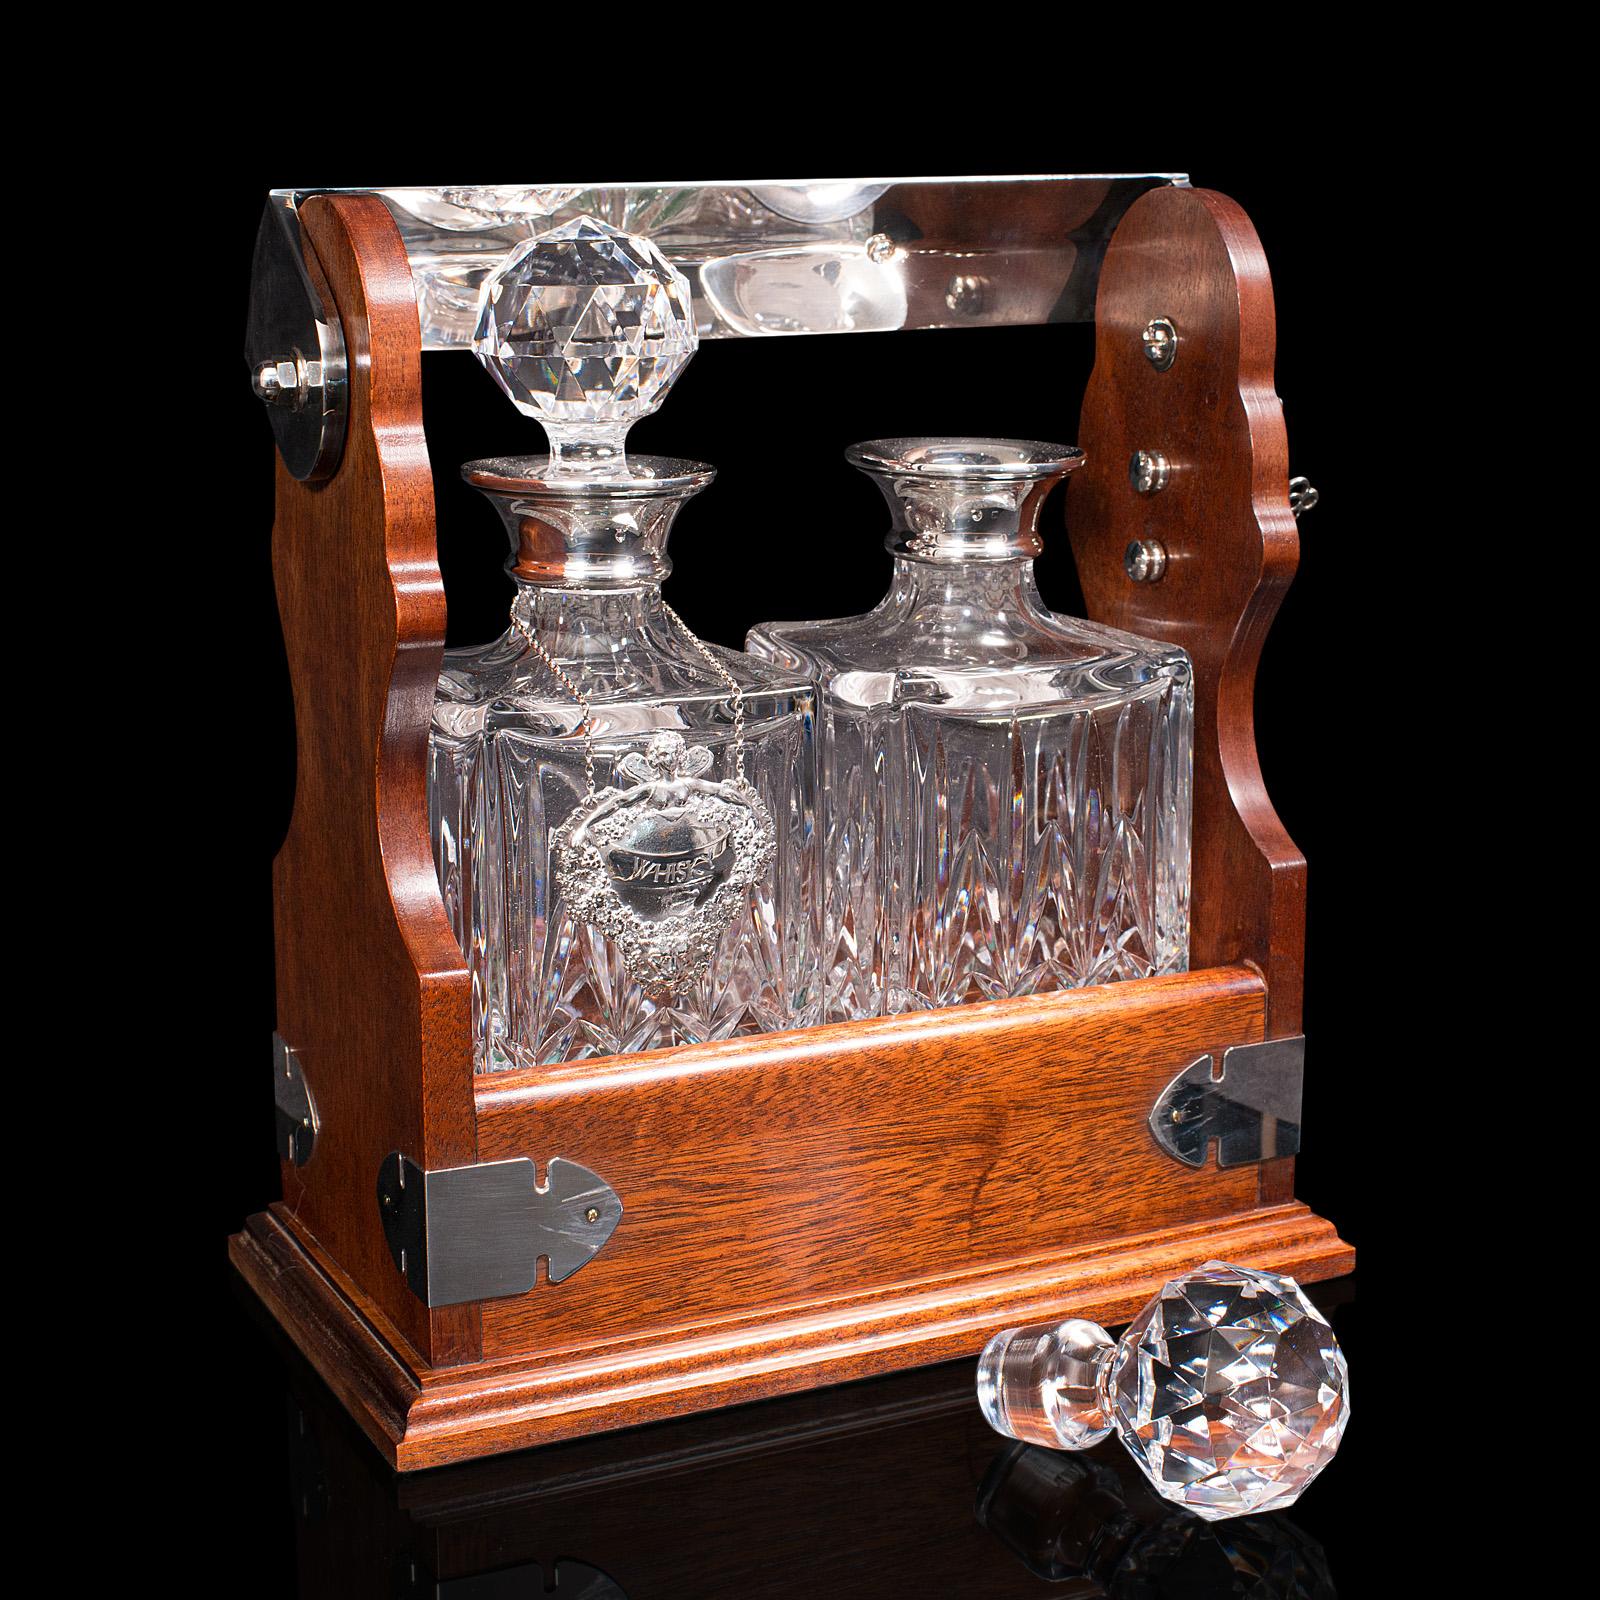 This is a vintage locking spirit Tantalus. An English, mahogany two decanter stand with hallmarked silver label and collar, dating to the late 20th century, circa 1990.

Useful and attractive tantalus with fine decorative appeal
Displays a